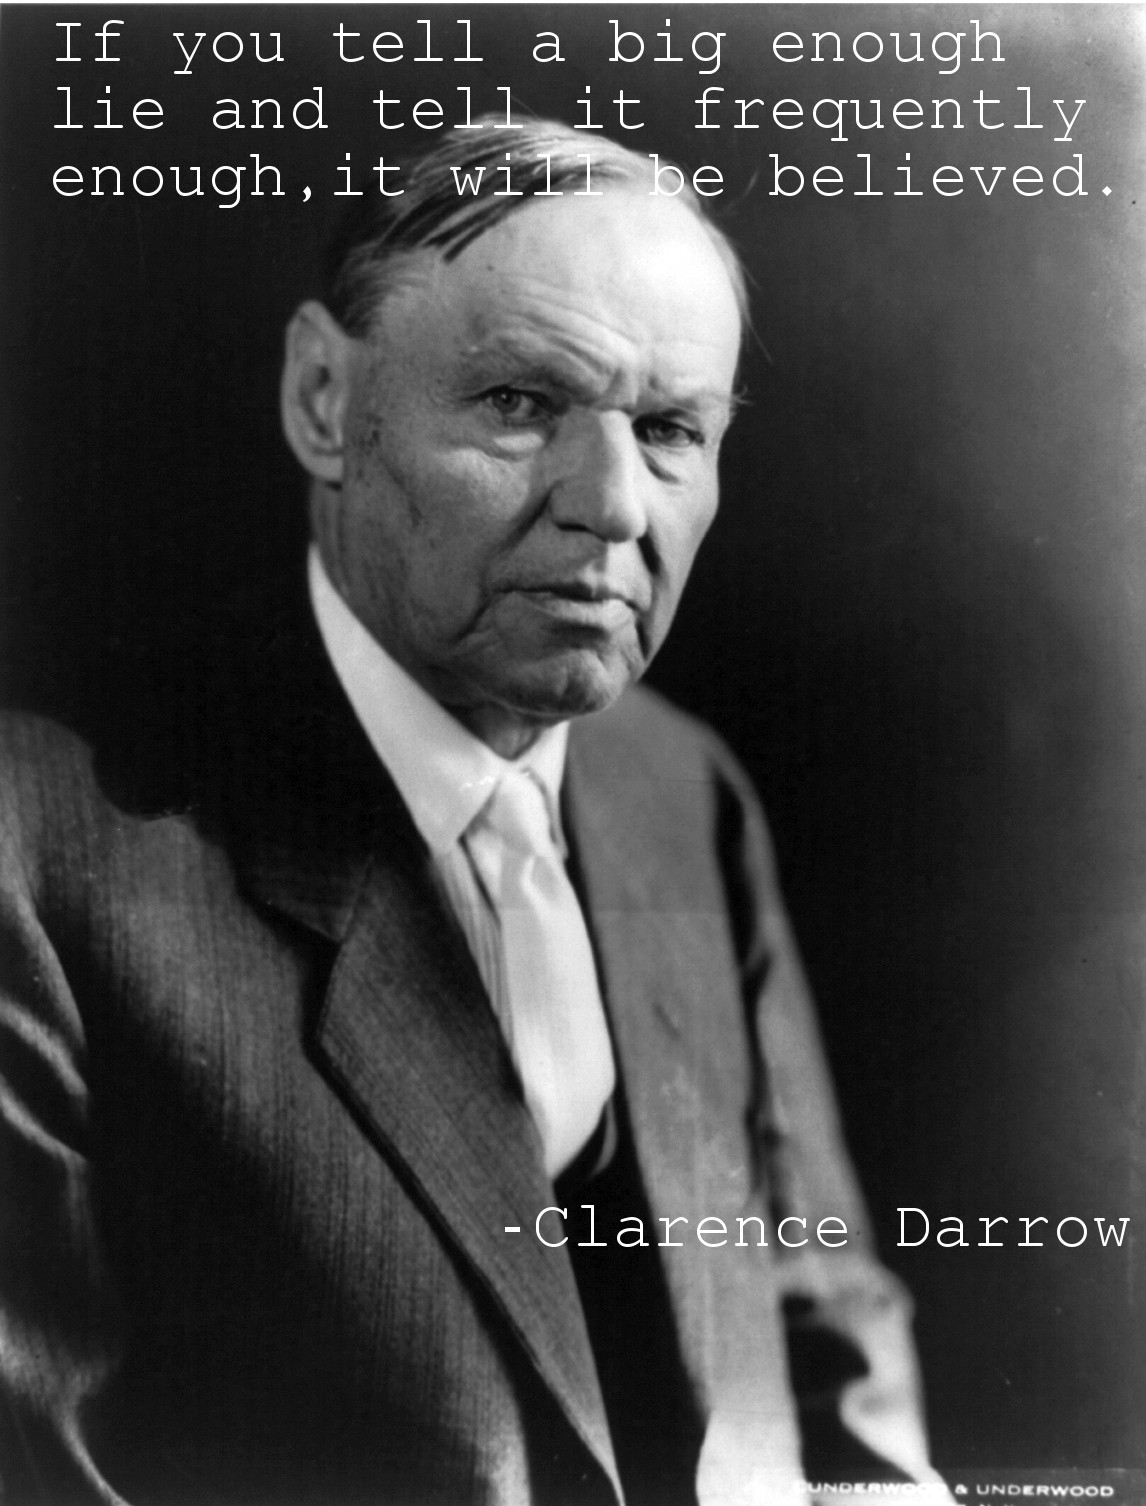 Clarence Darrow's quote #4